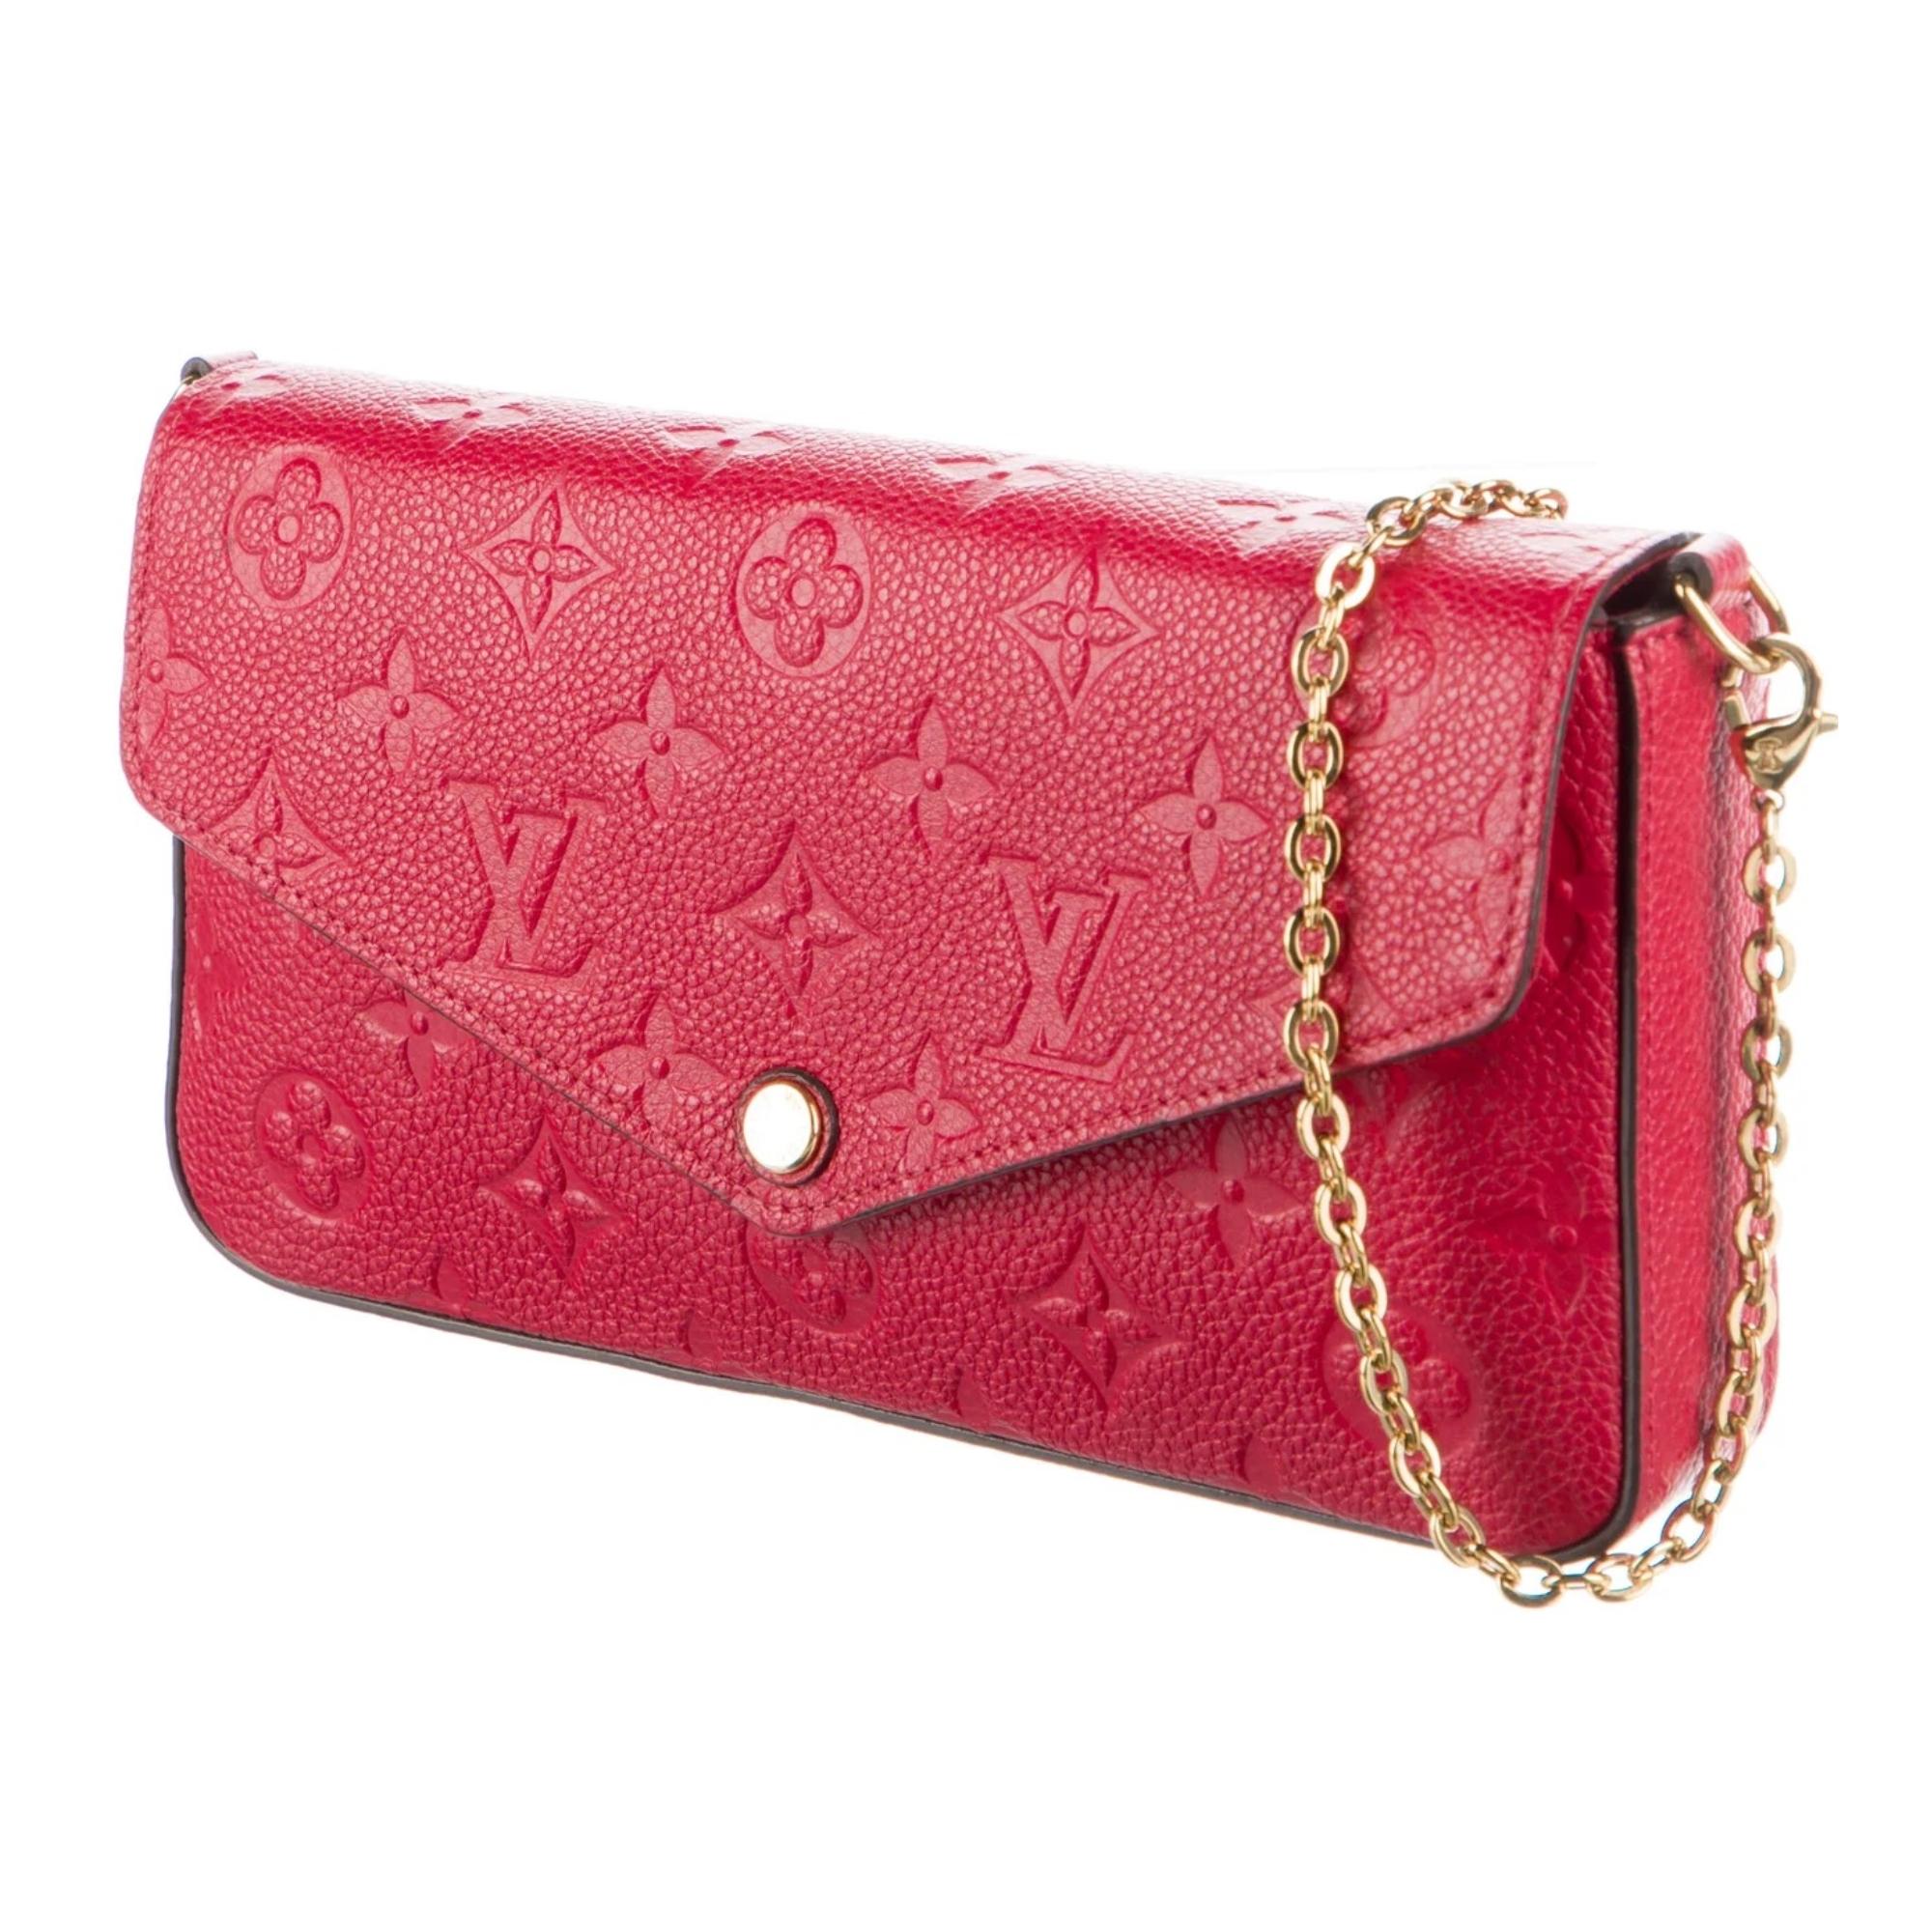 This pochette with a chain bag is constructed of Louis Vuitton monogrammed empreinte leather in red. Louis's empreinte leather is a supple grained cowhide with monogram embossing. The shoulder bag features an envelope style facing flap. This opens